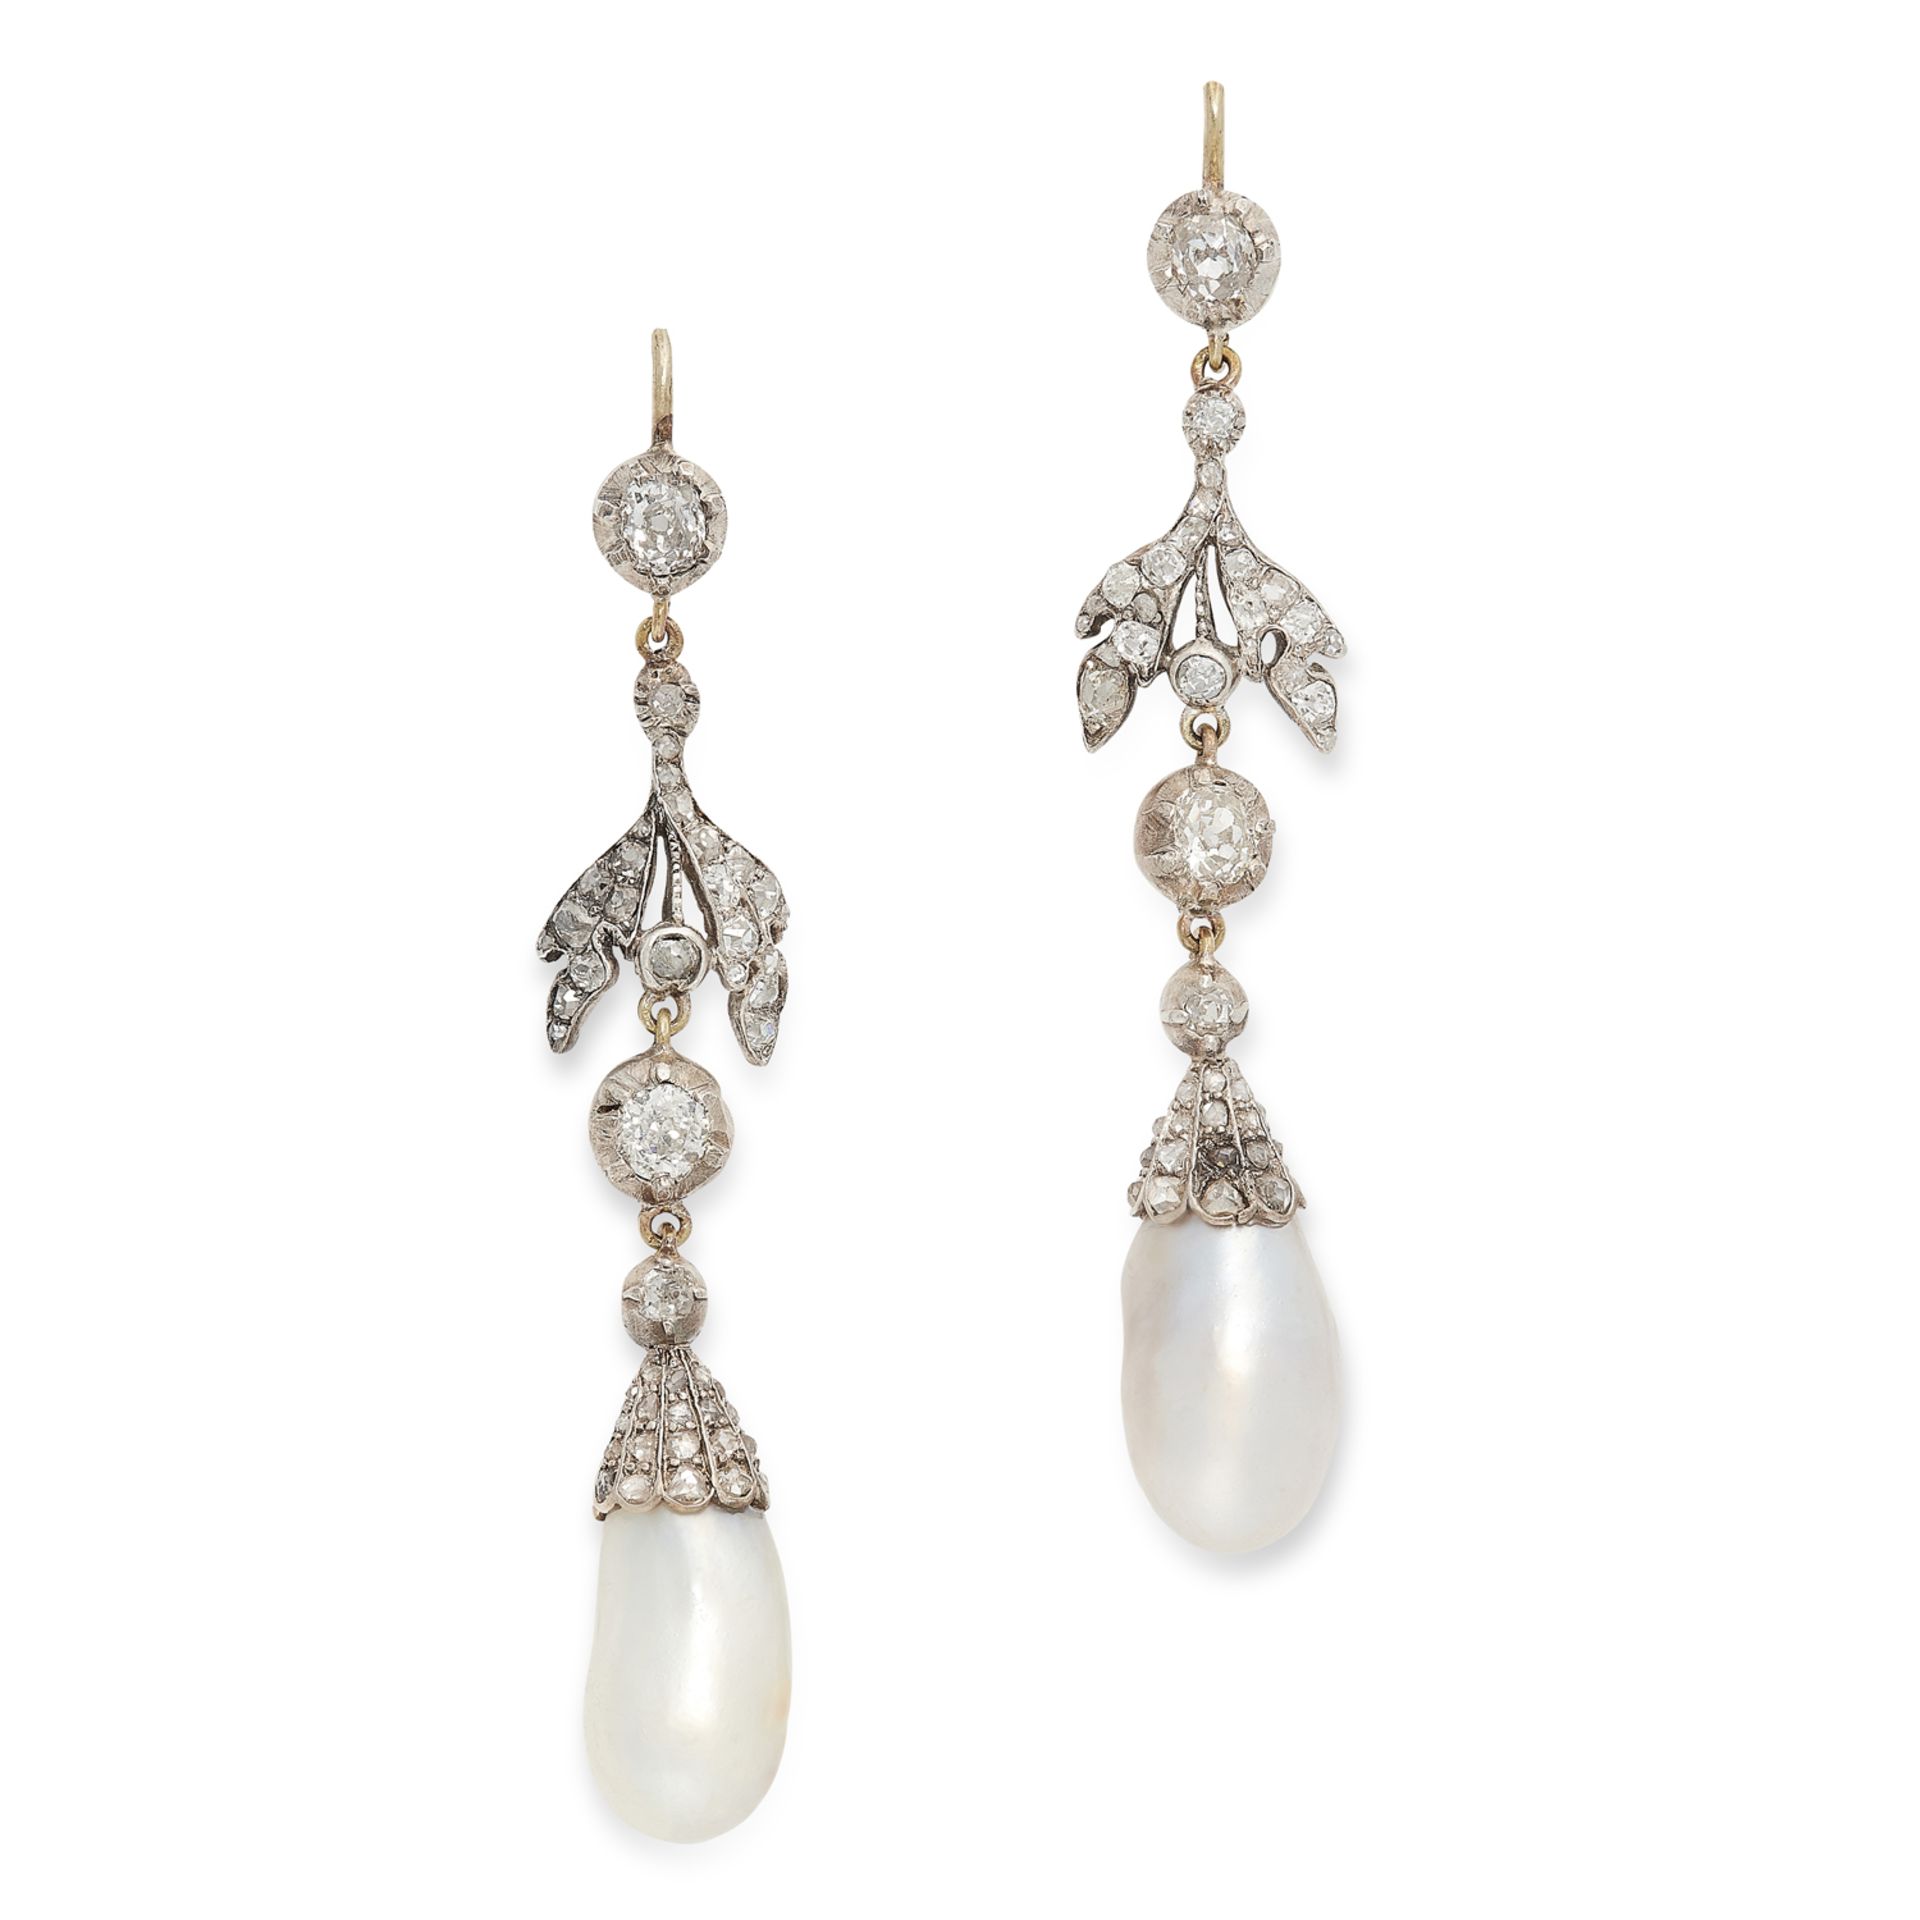 A PAIR OF ANTIQUE NATURAL PEARL AND DIAMOND EARRINGS, 19TH CENTURY in yellow gold and silver,